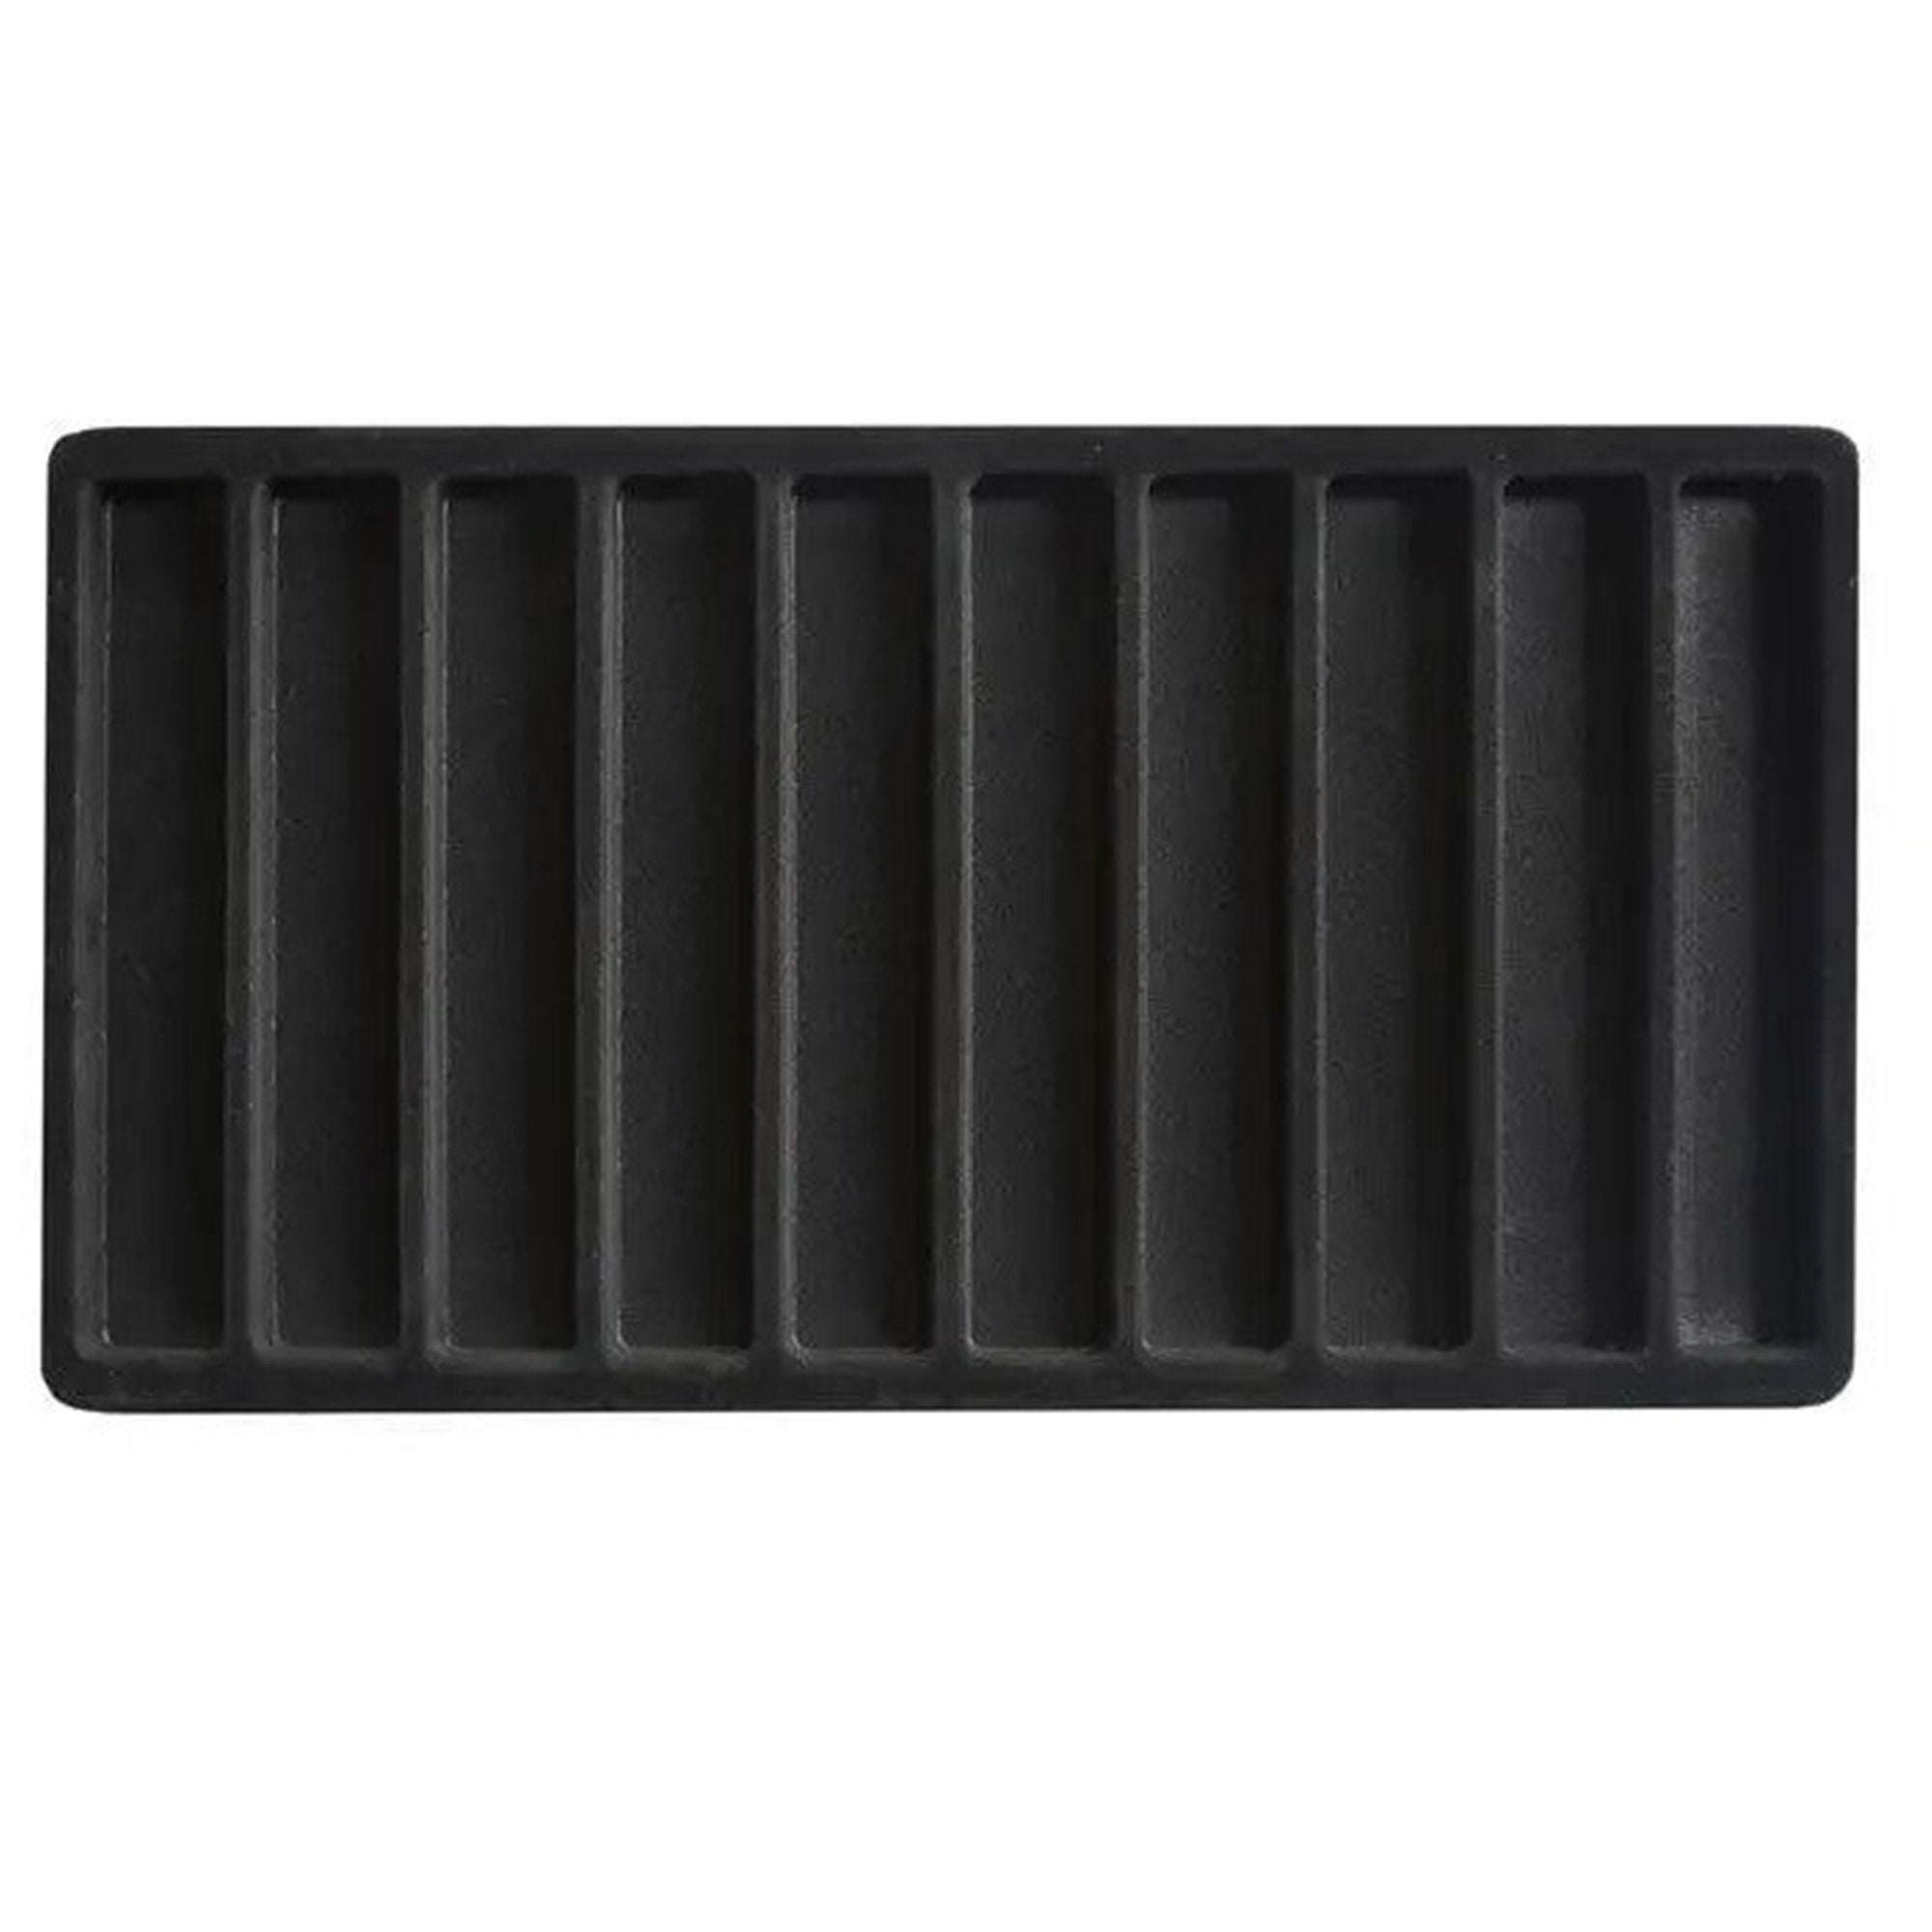 Gemstone Black Foam Tray Liner with 24 Cups